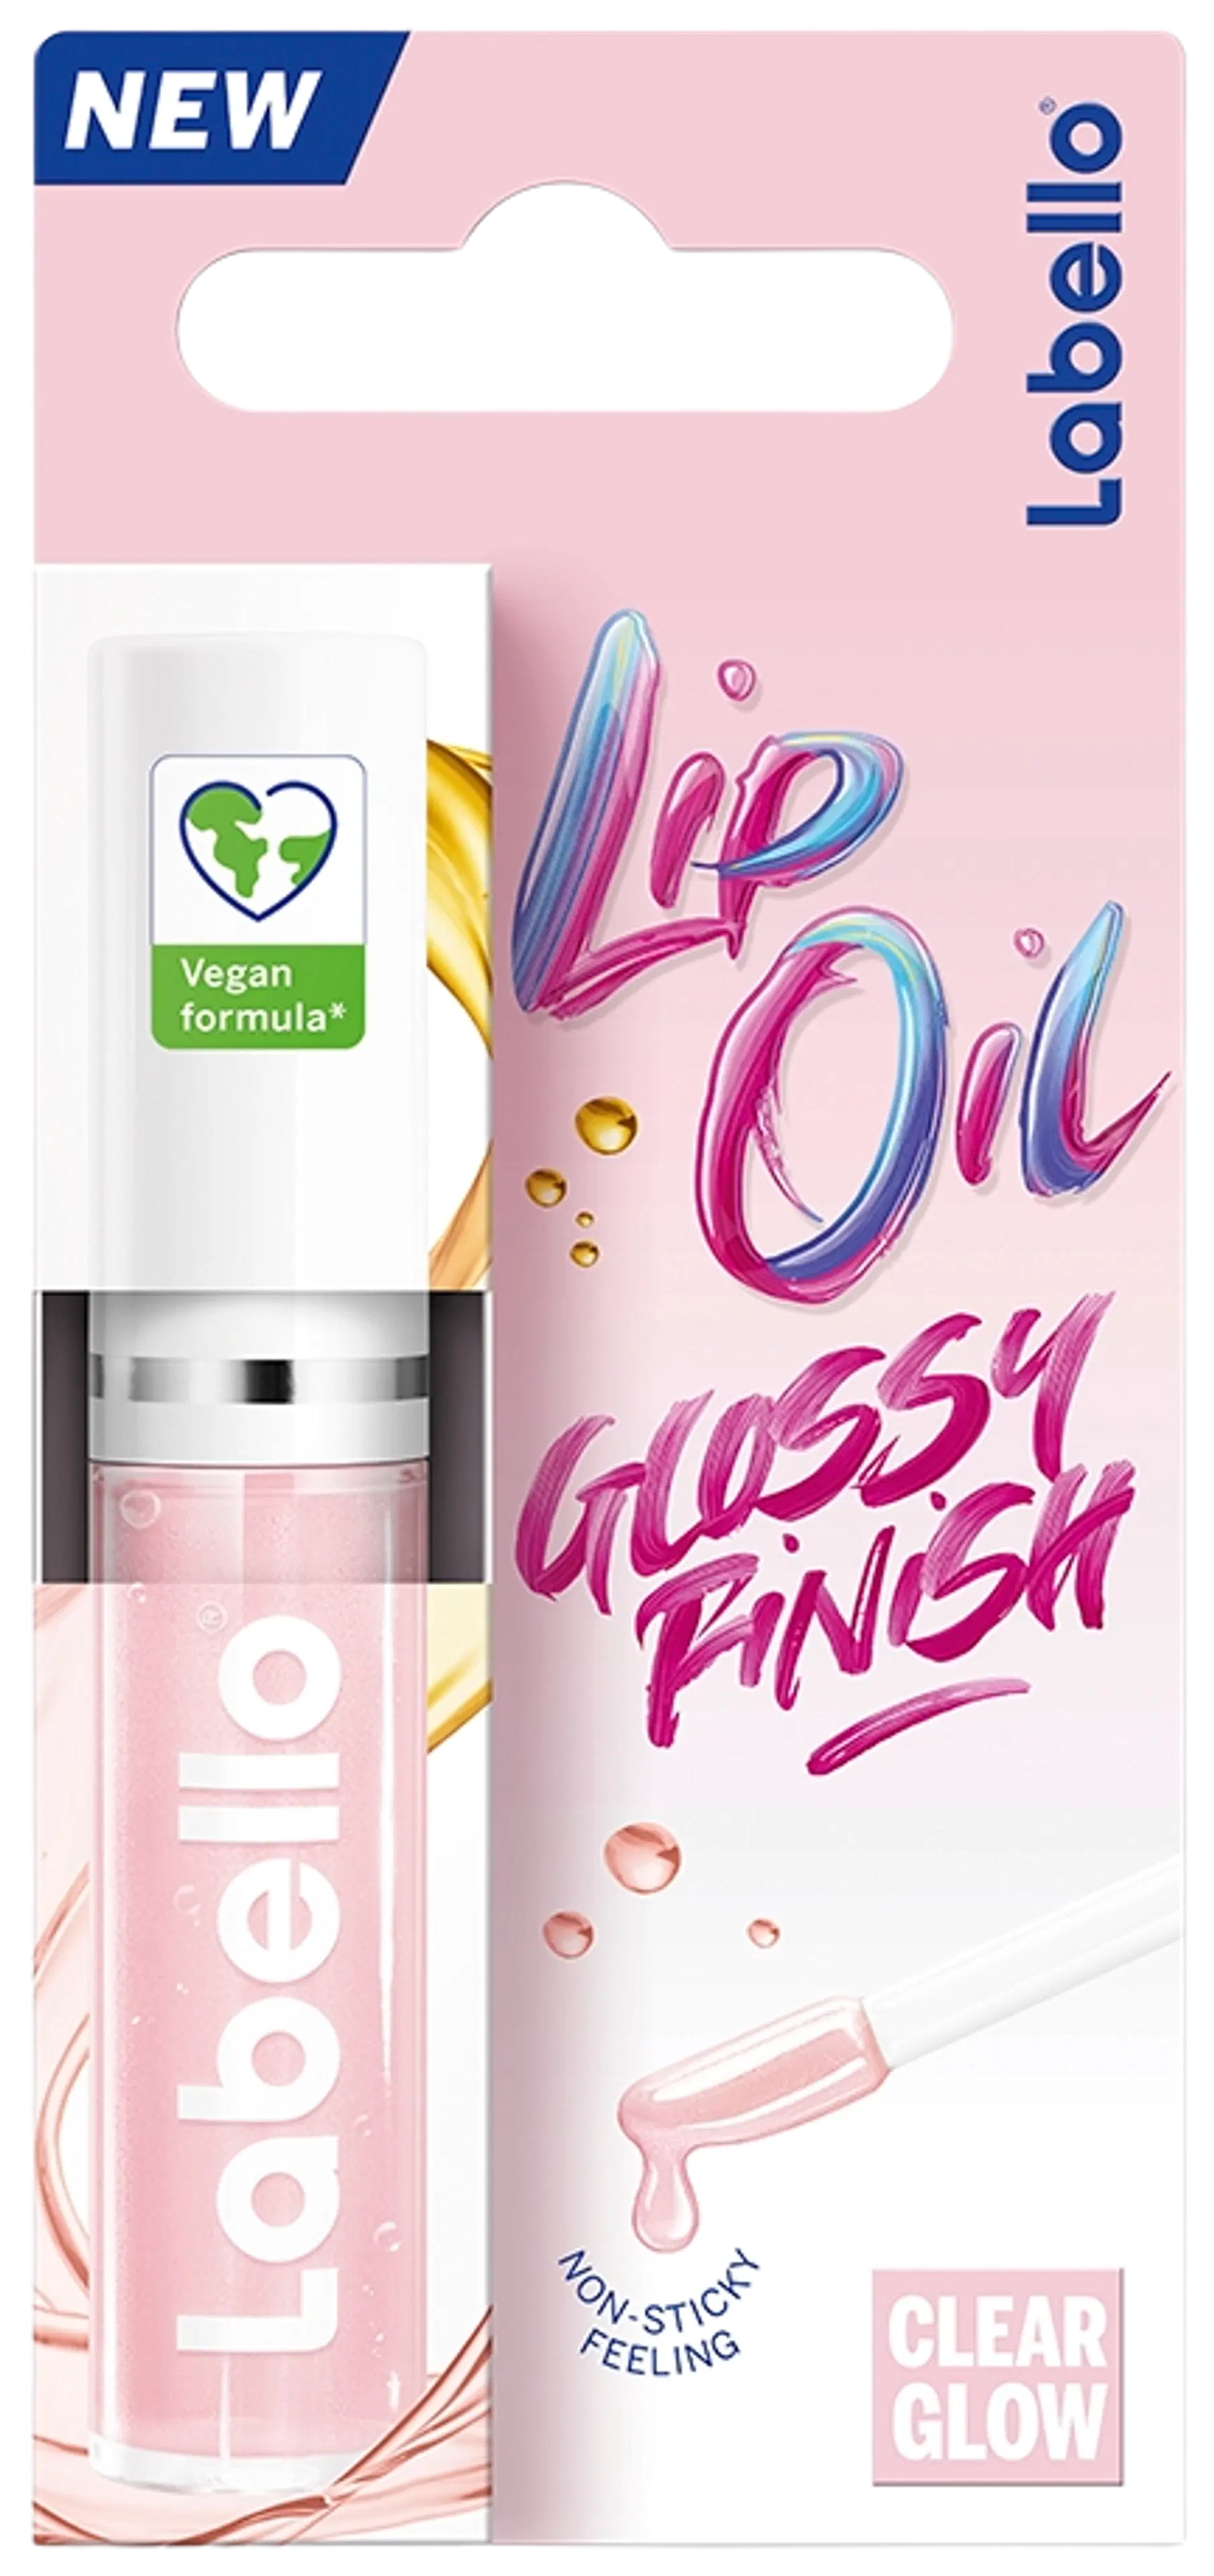 Labello 5,5ml Caring Lip Oil Clear Glow -huuliöljy